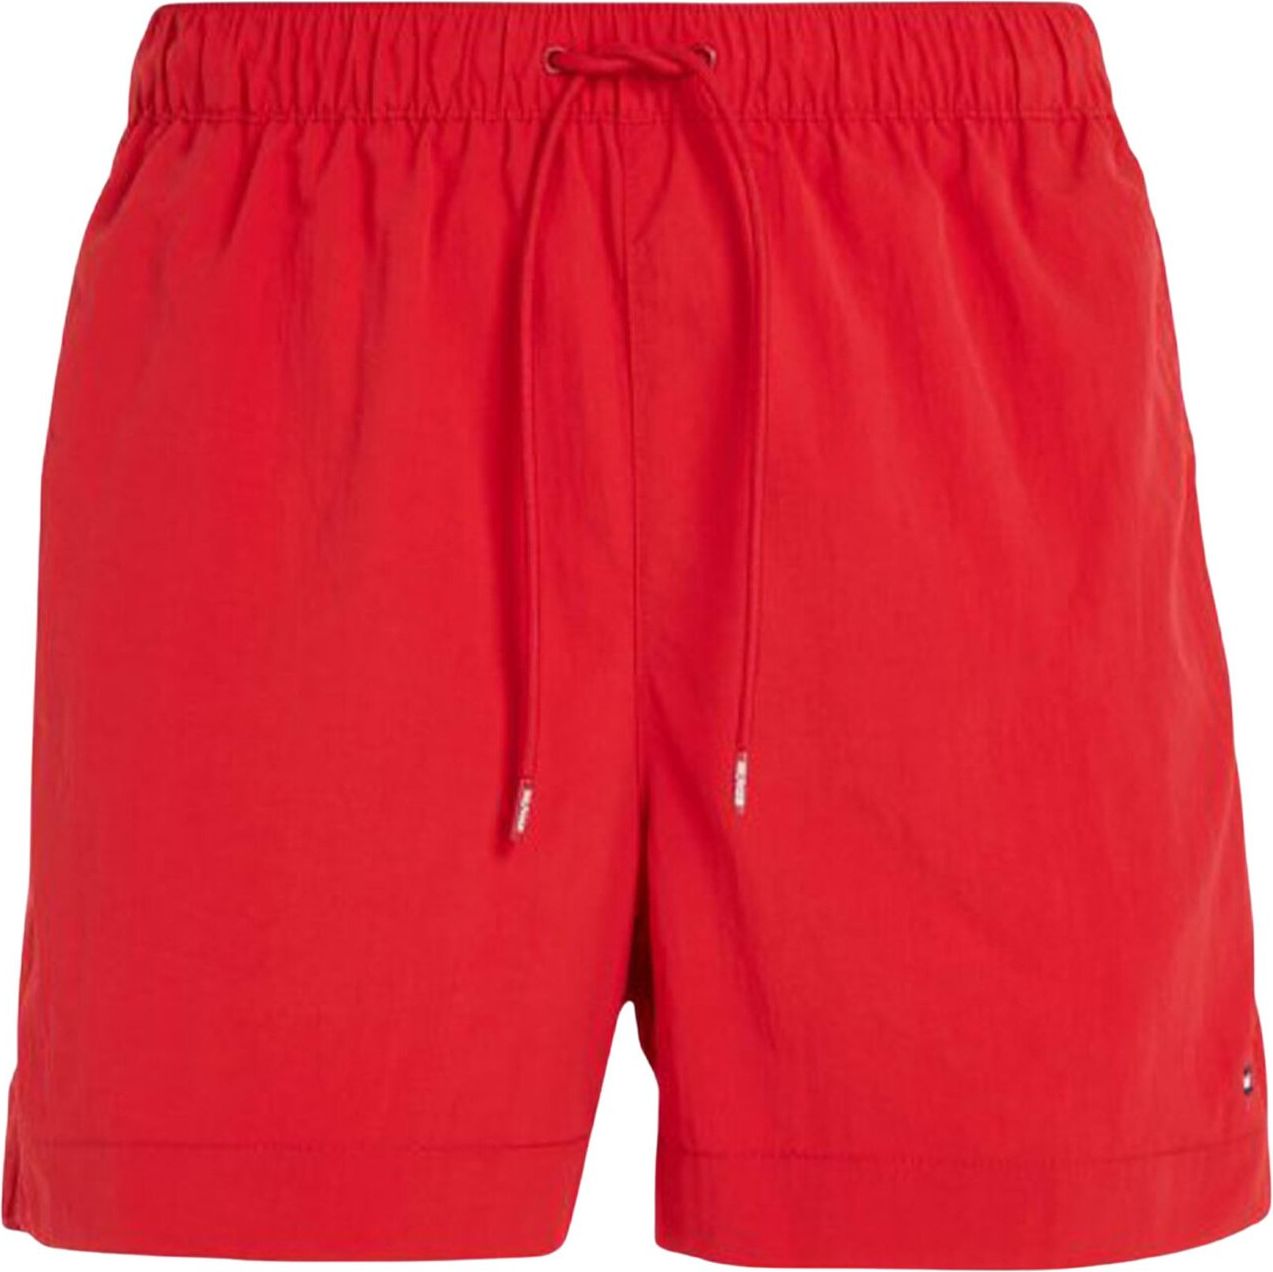 Tommy Hilfiger Zwembroek Rood Rood